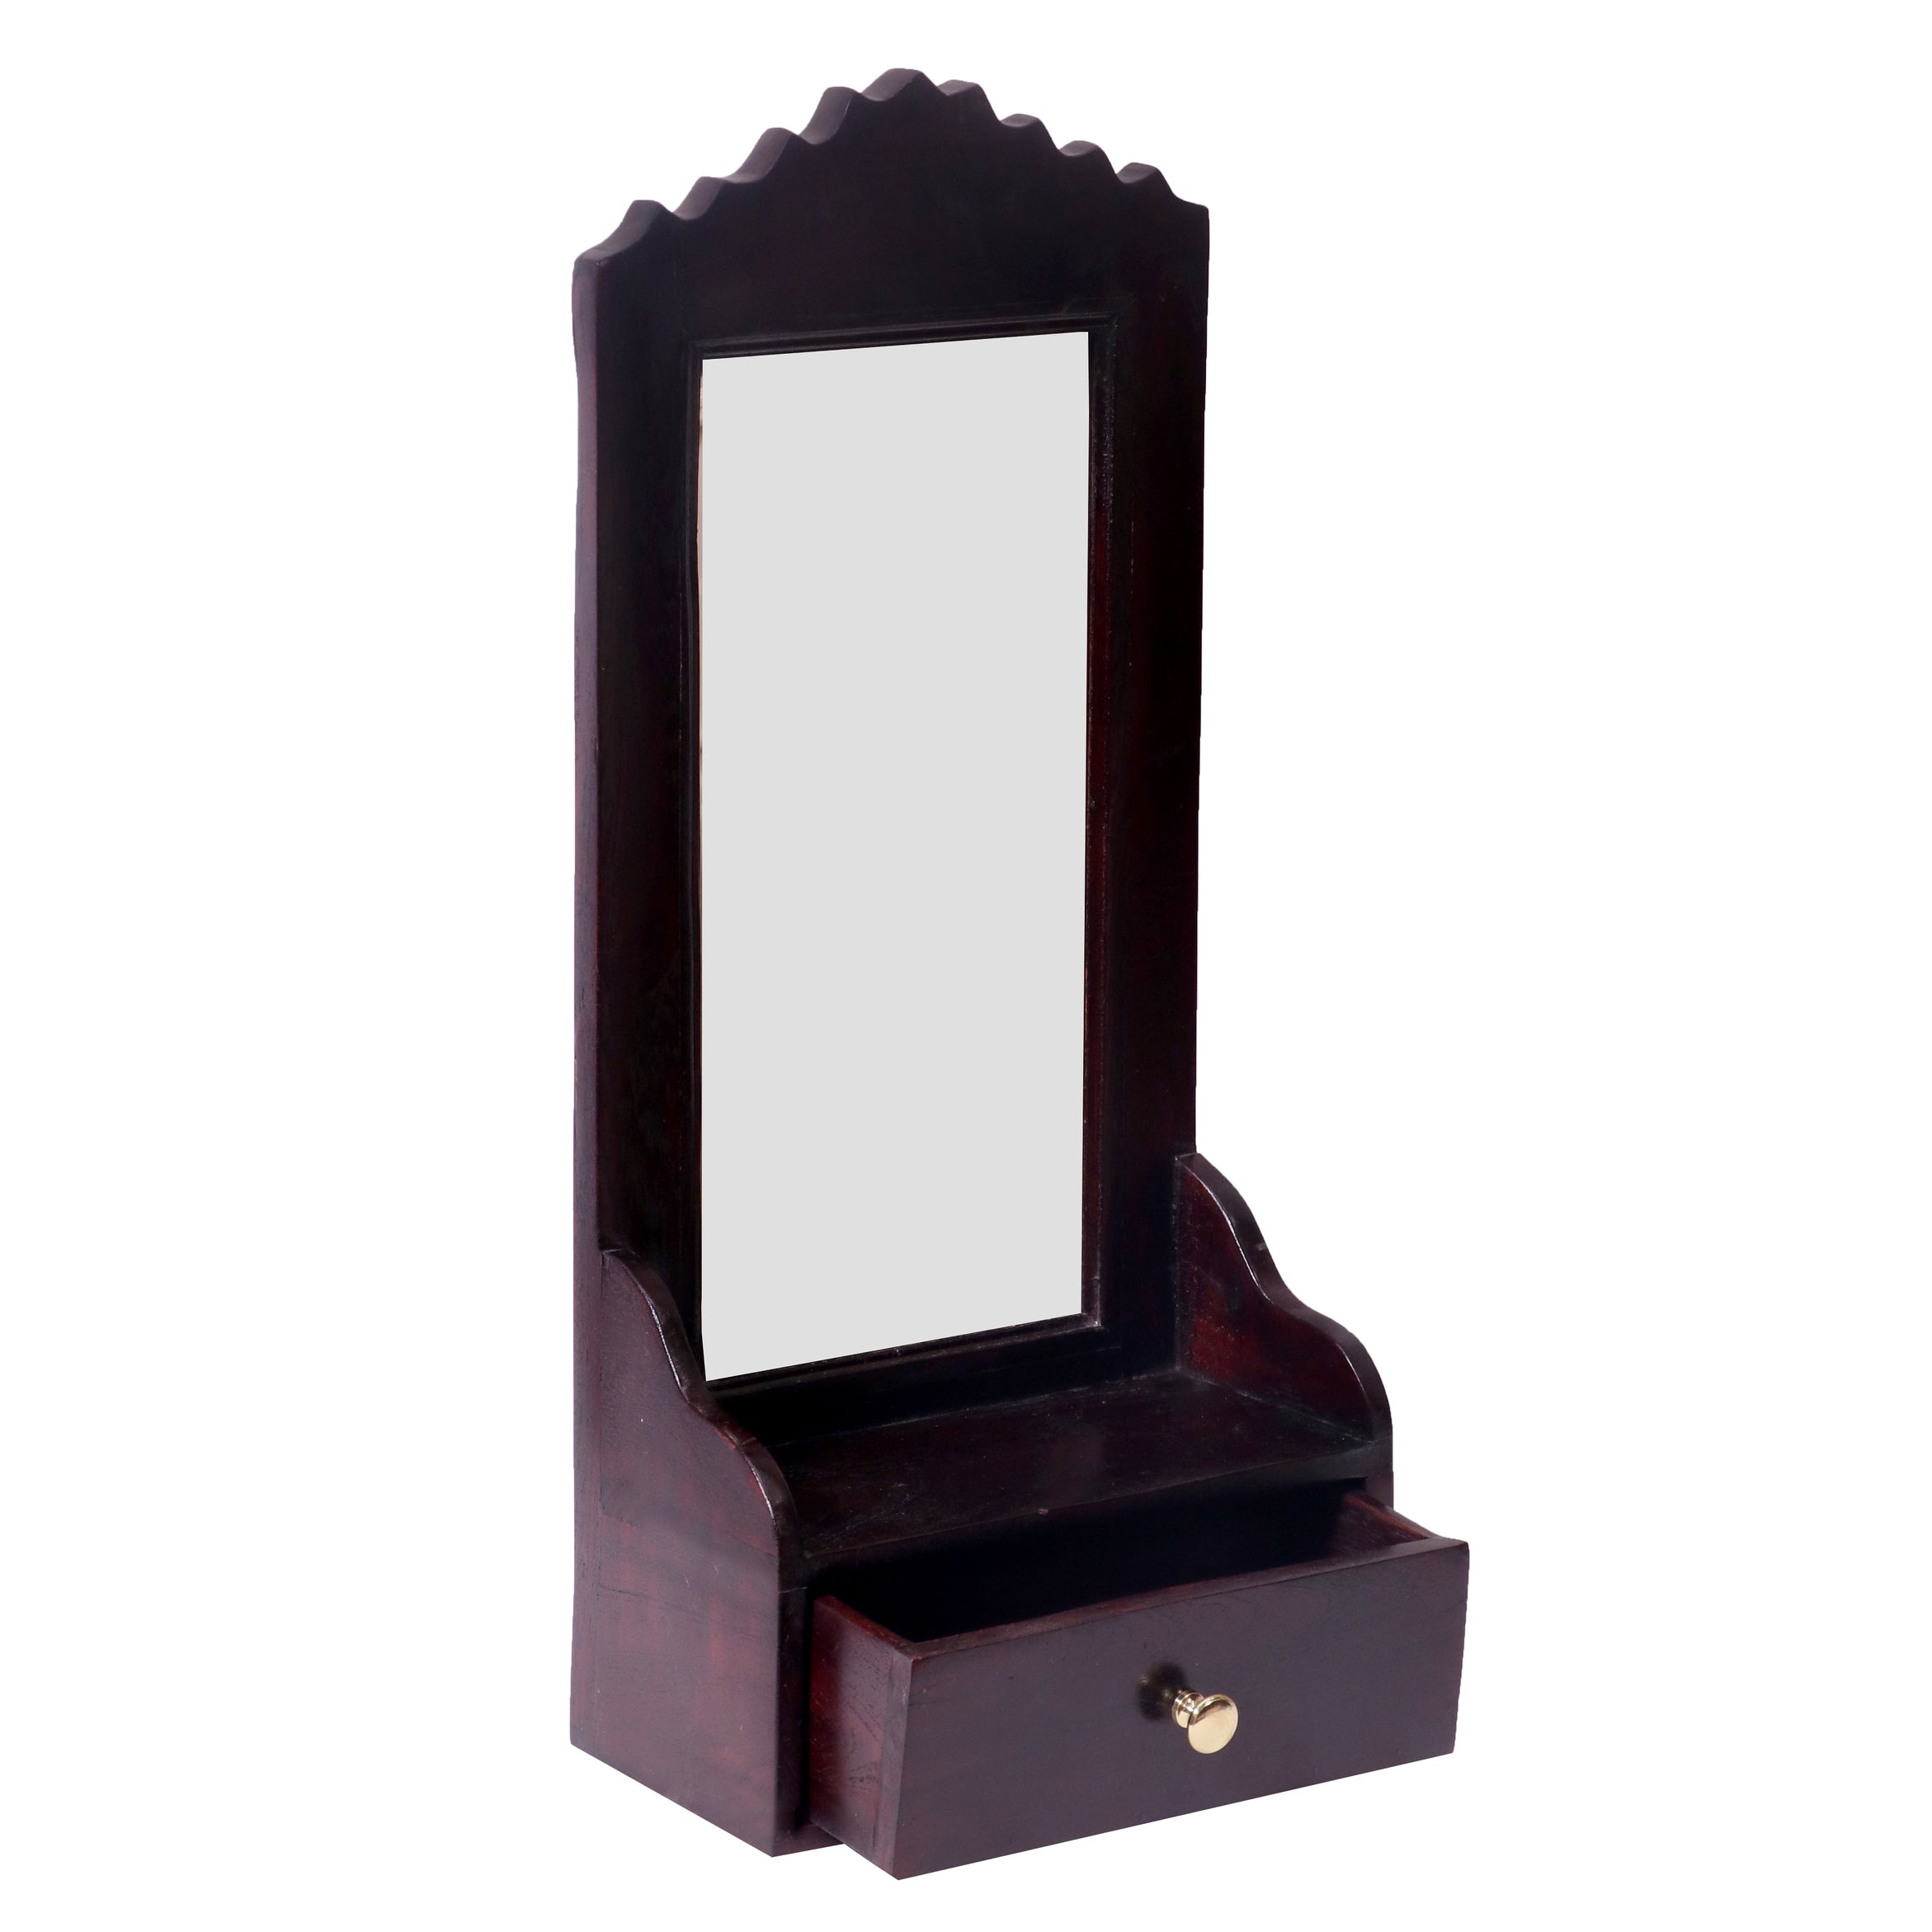 Solid wood single drawer wall hanging mirror Mirror